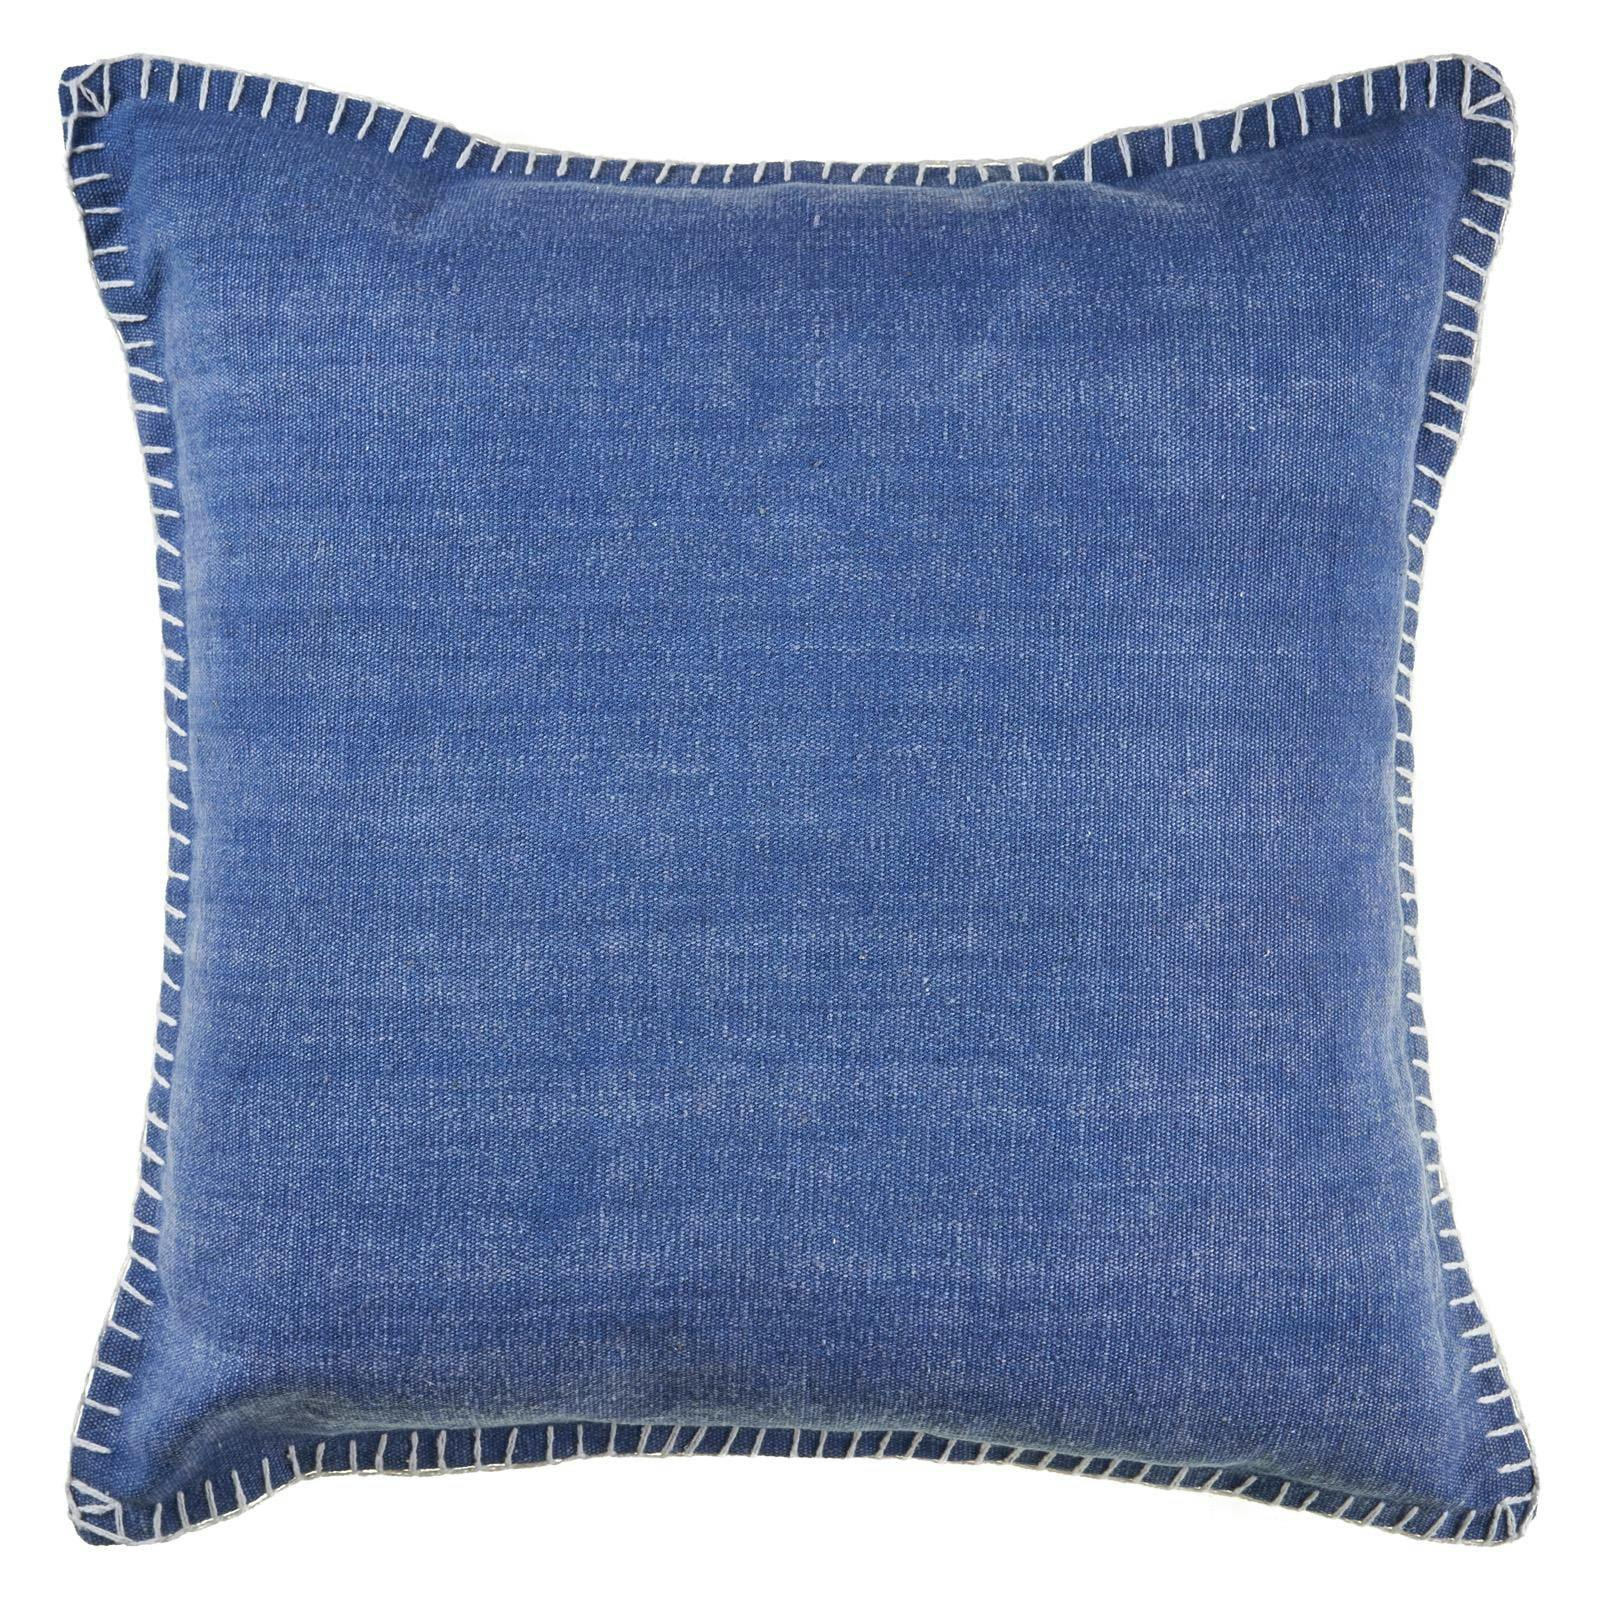 Twilight Blue Square Embroidered Jumbo Throw Pillow